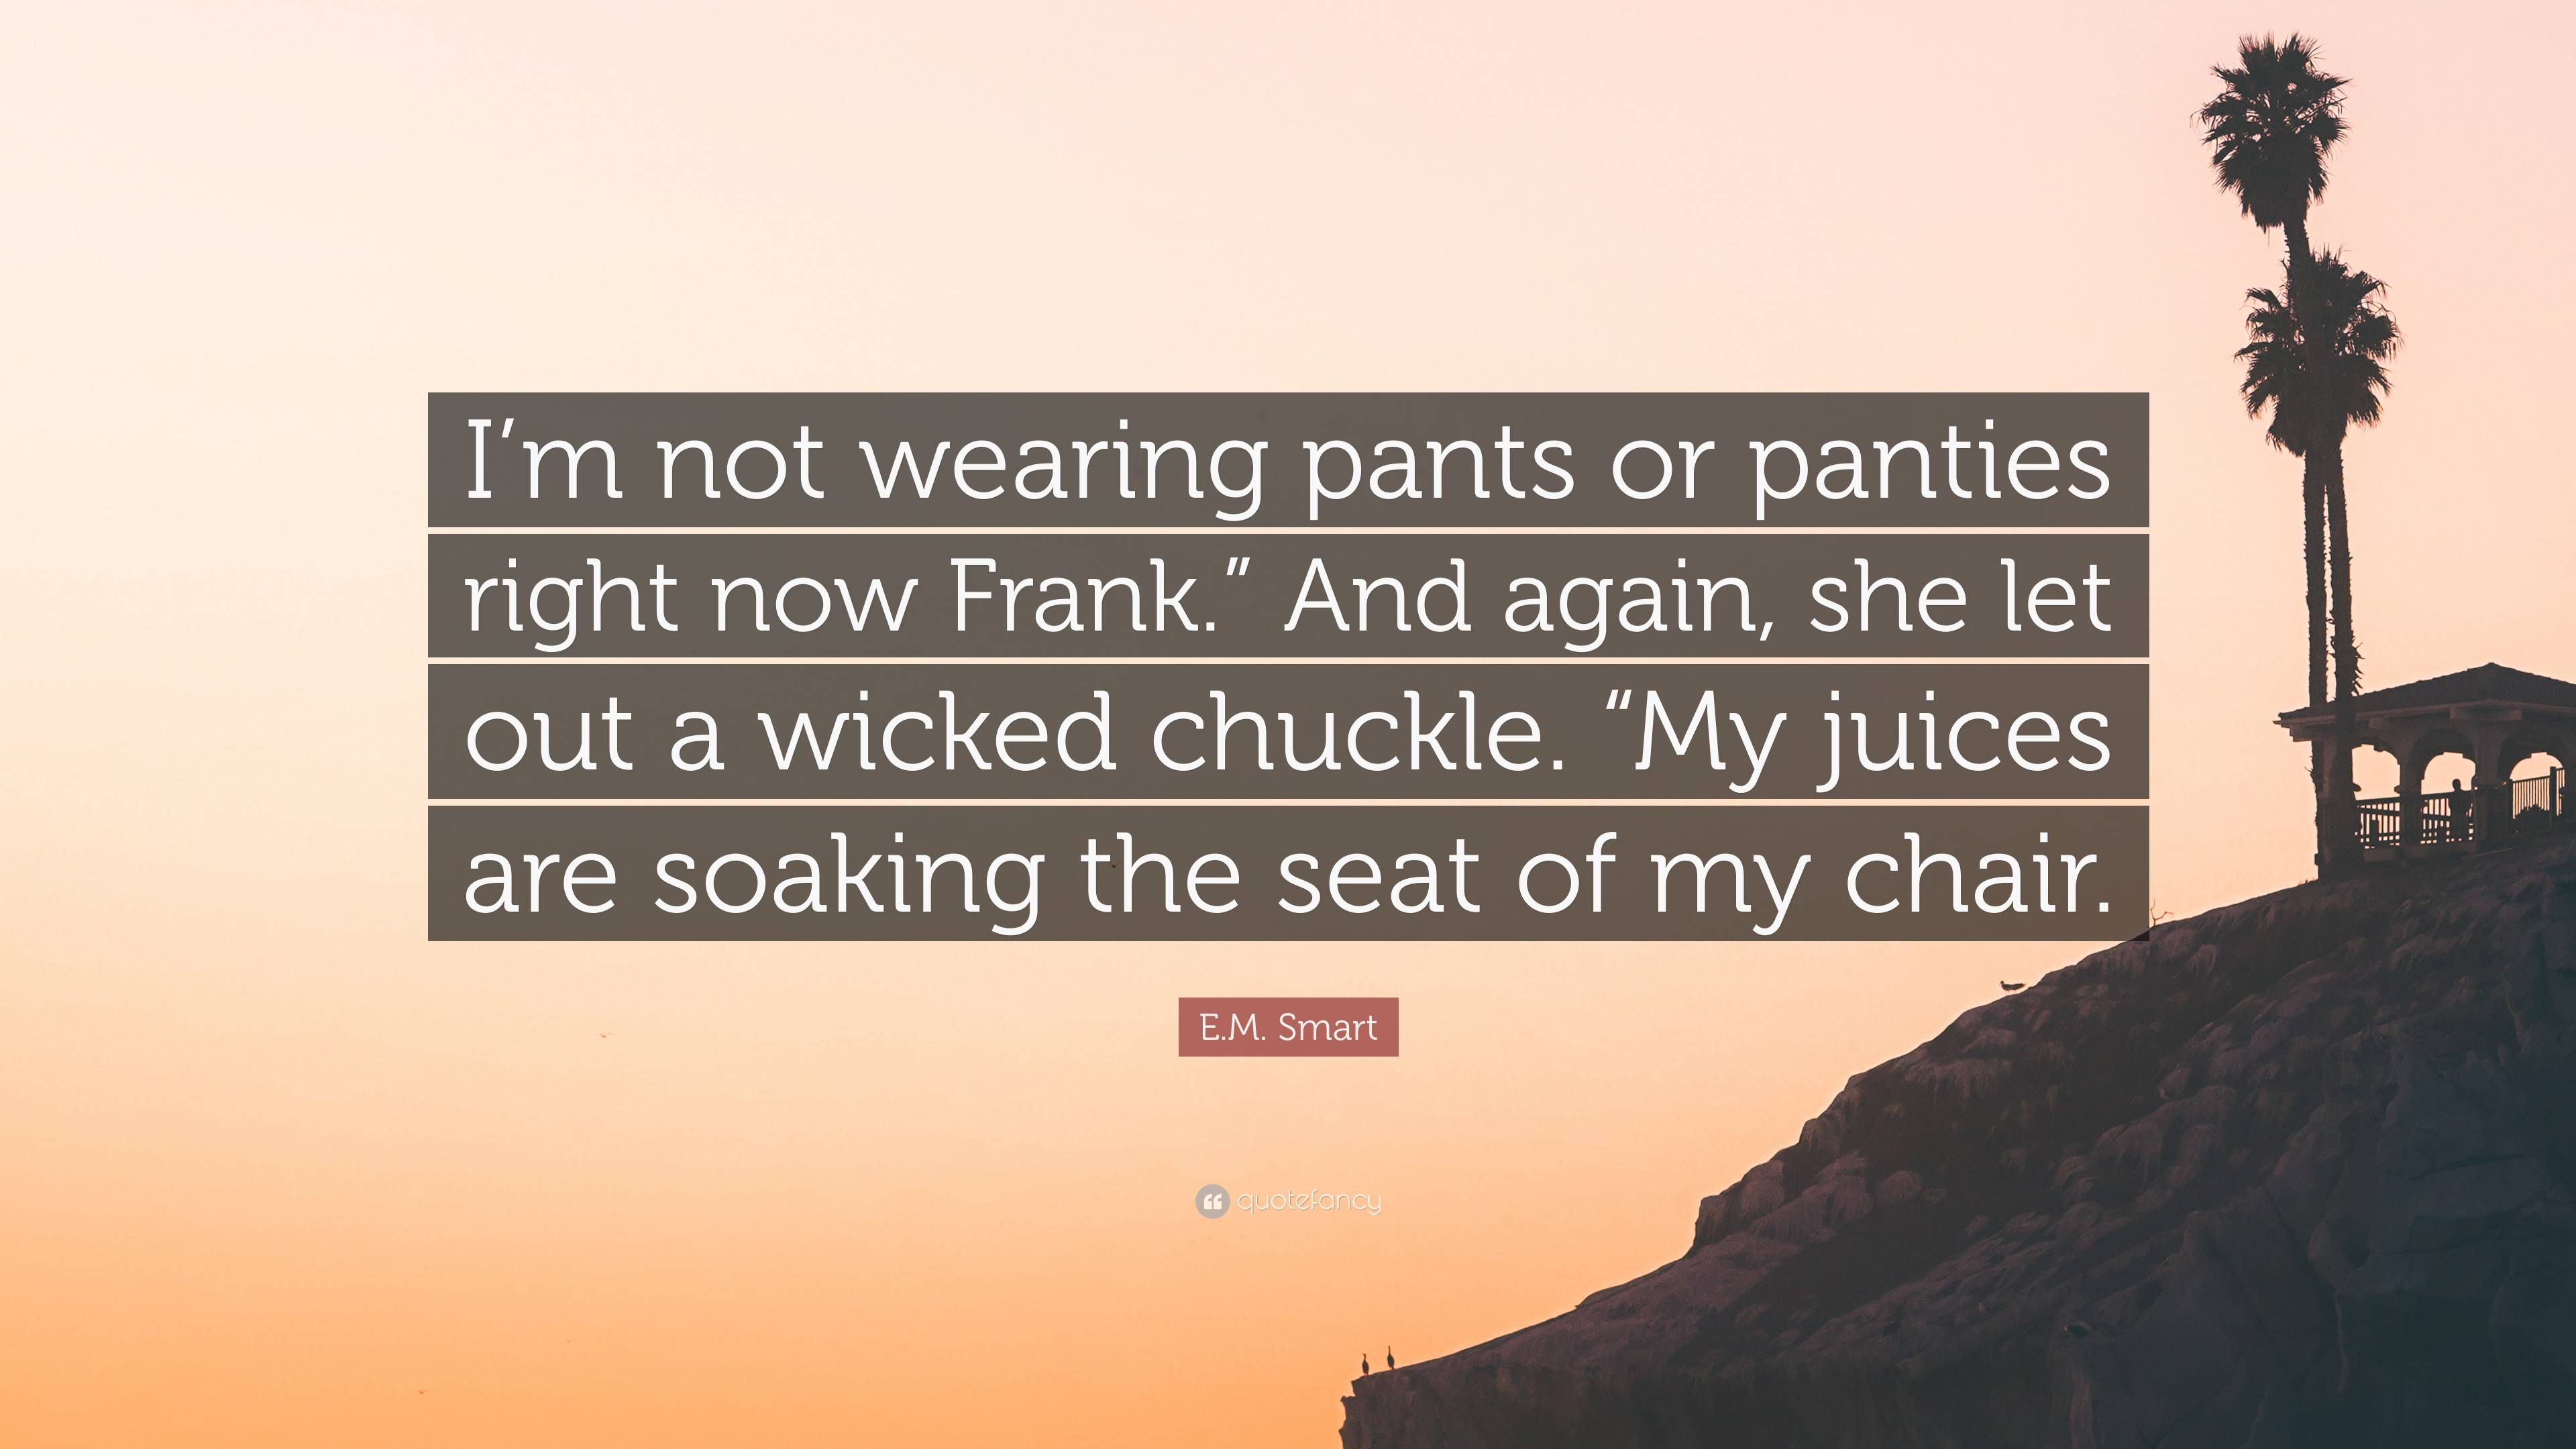 https://quotefancy.com/media/wallpaper/3840x2160/7534928-E-M-Smart-Quote-I-m-not-wearing-pants-or-panties-right-now-Frank.jpg